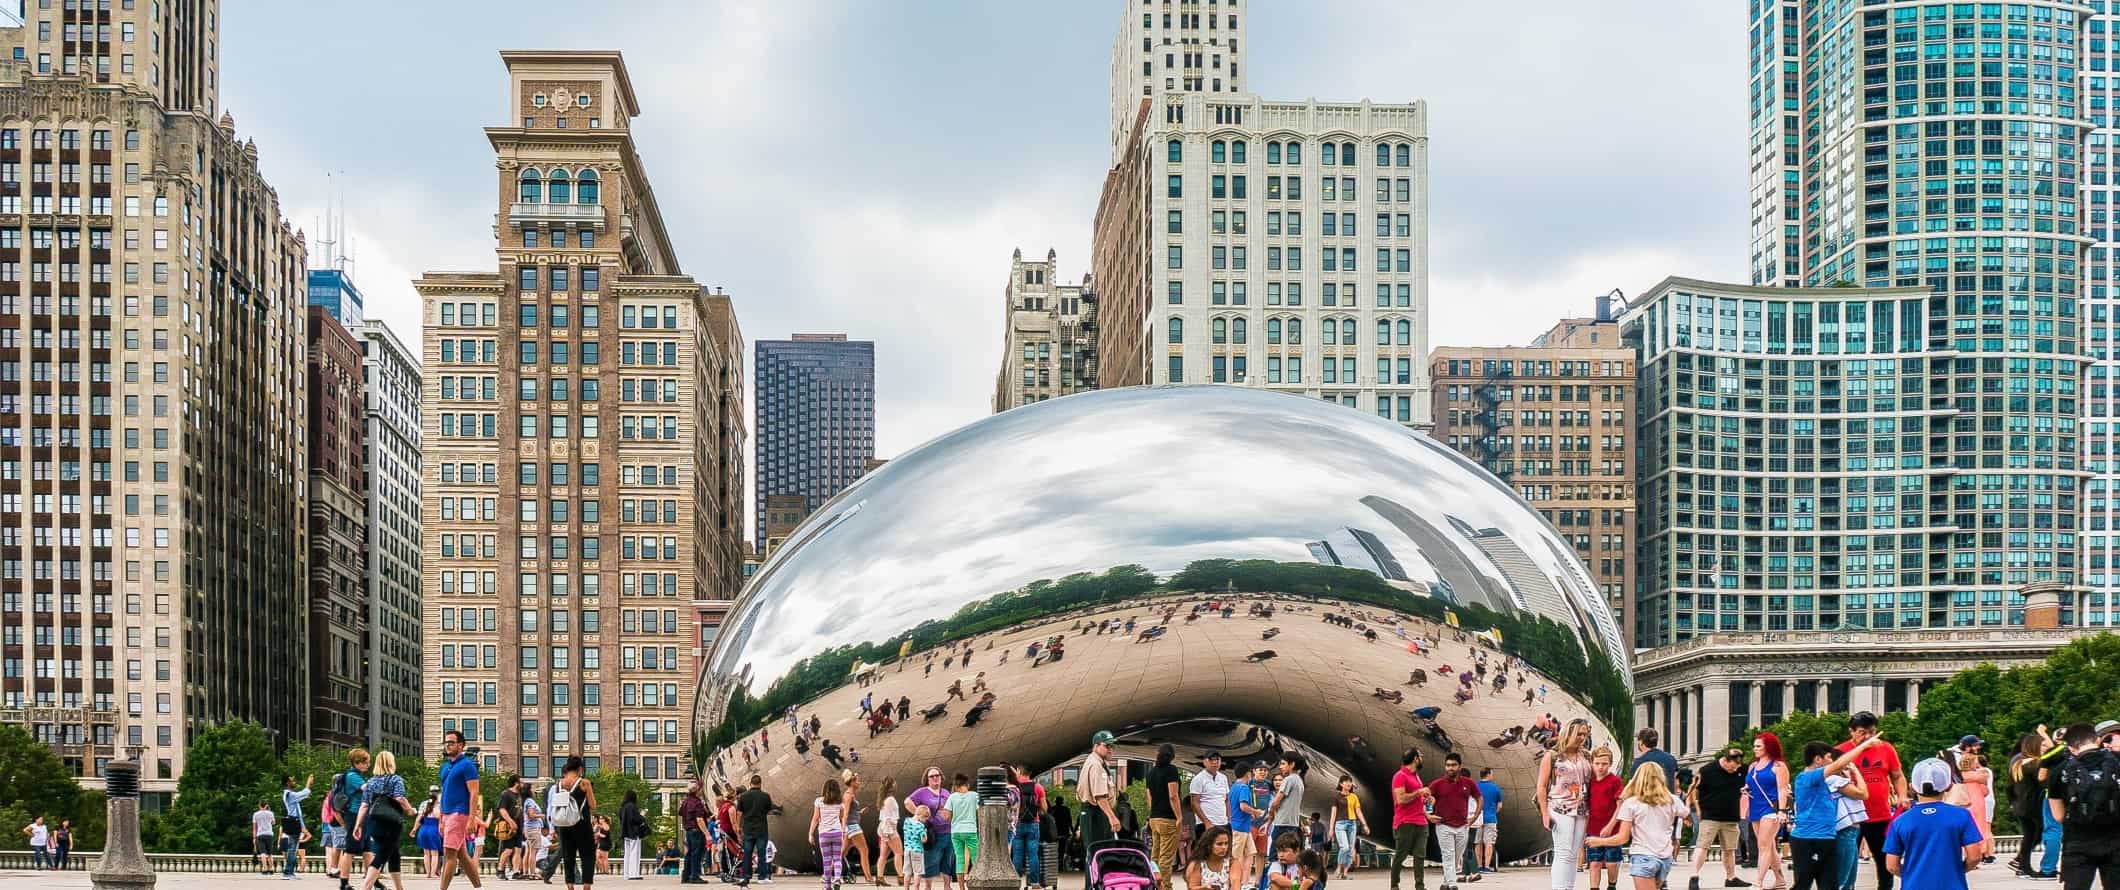 The huge, reflective chrome bean with people surrounding and tall buildings behind it in Chicago, USA.